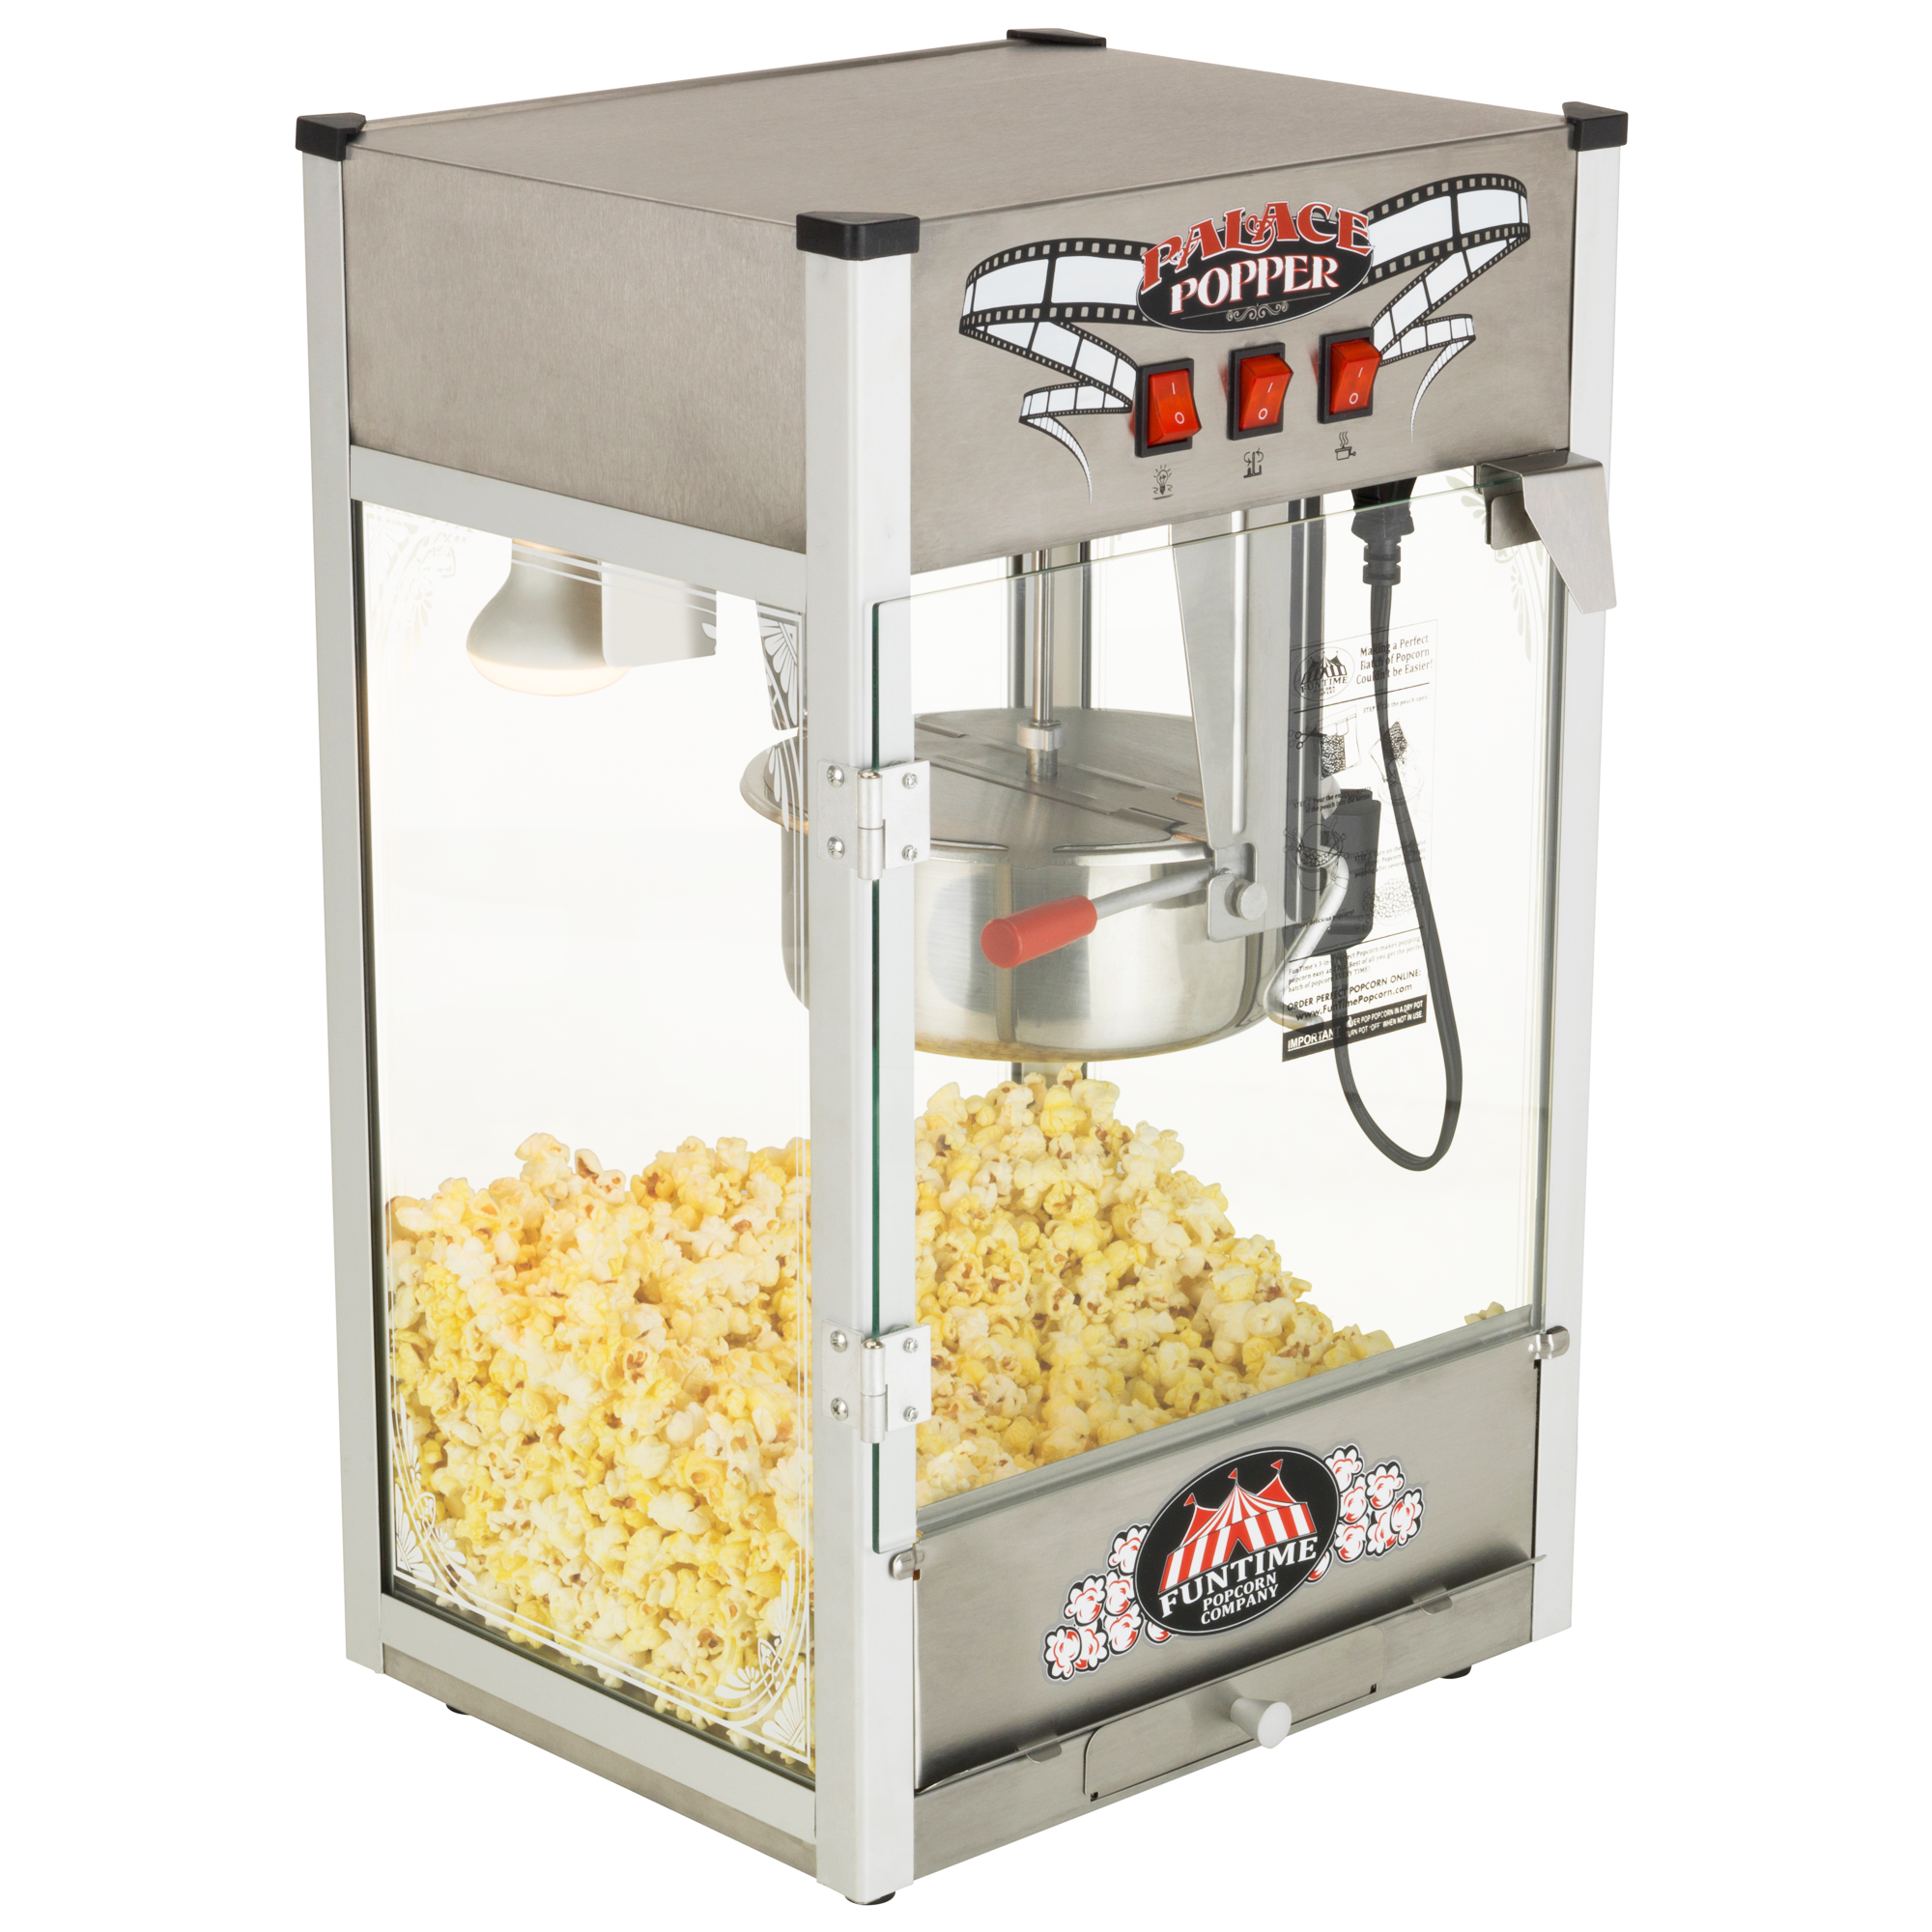 Great Northern Popcorn - The Perfect Snack for Any Occasion!